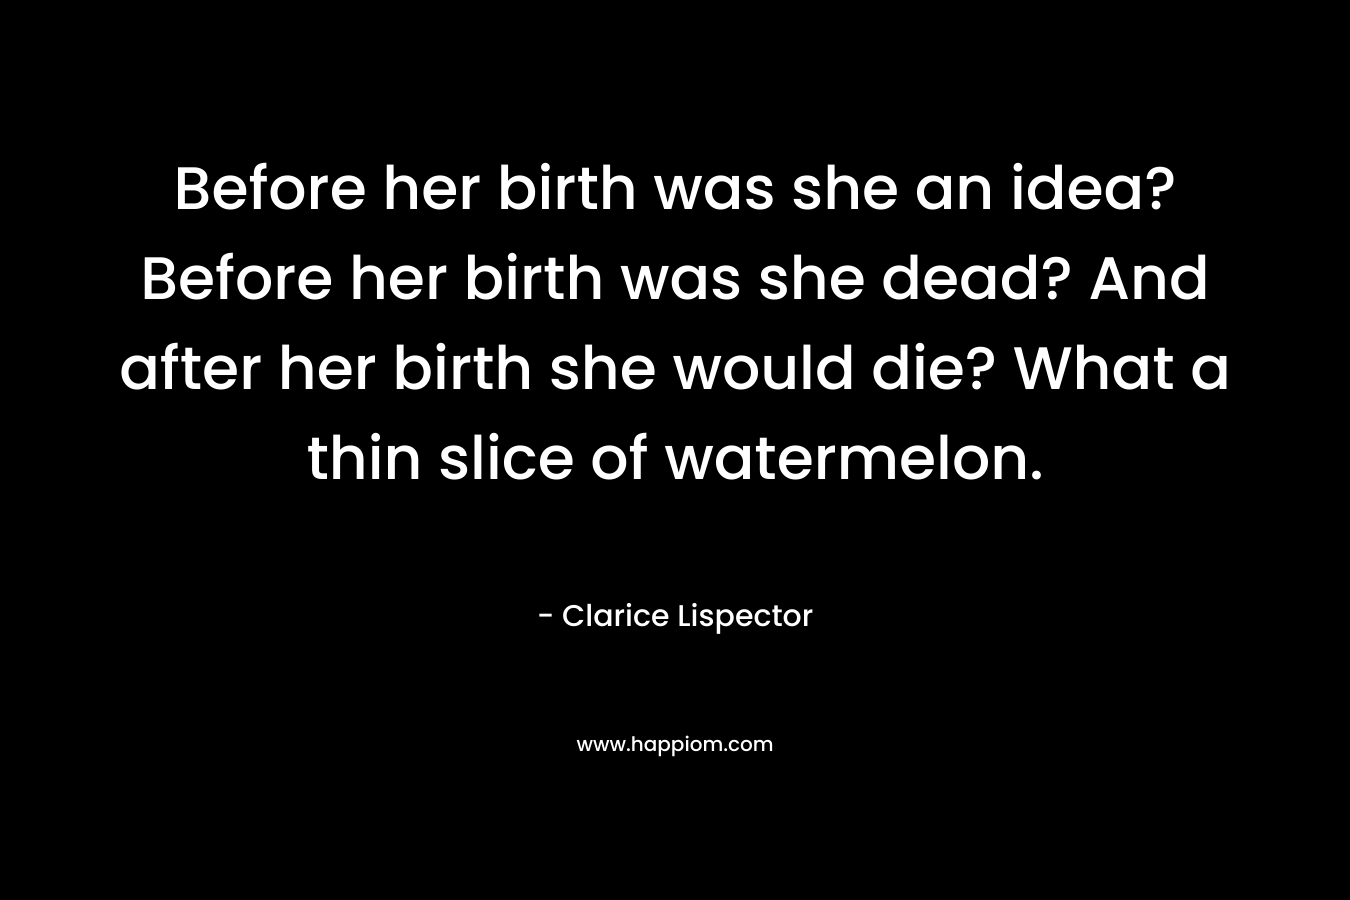 Before her birth was she an idea? Before her birth was she dead? And after her birth she would die? What a thin slice of watermelon.